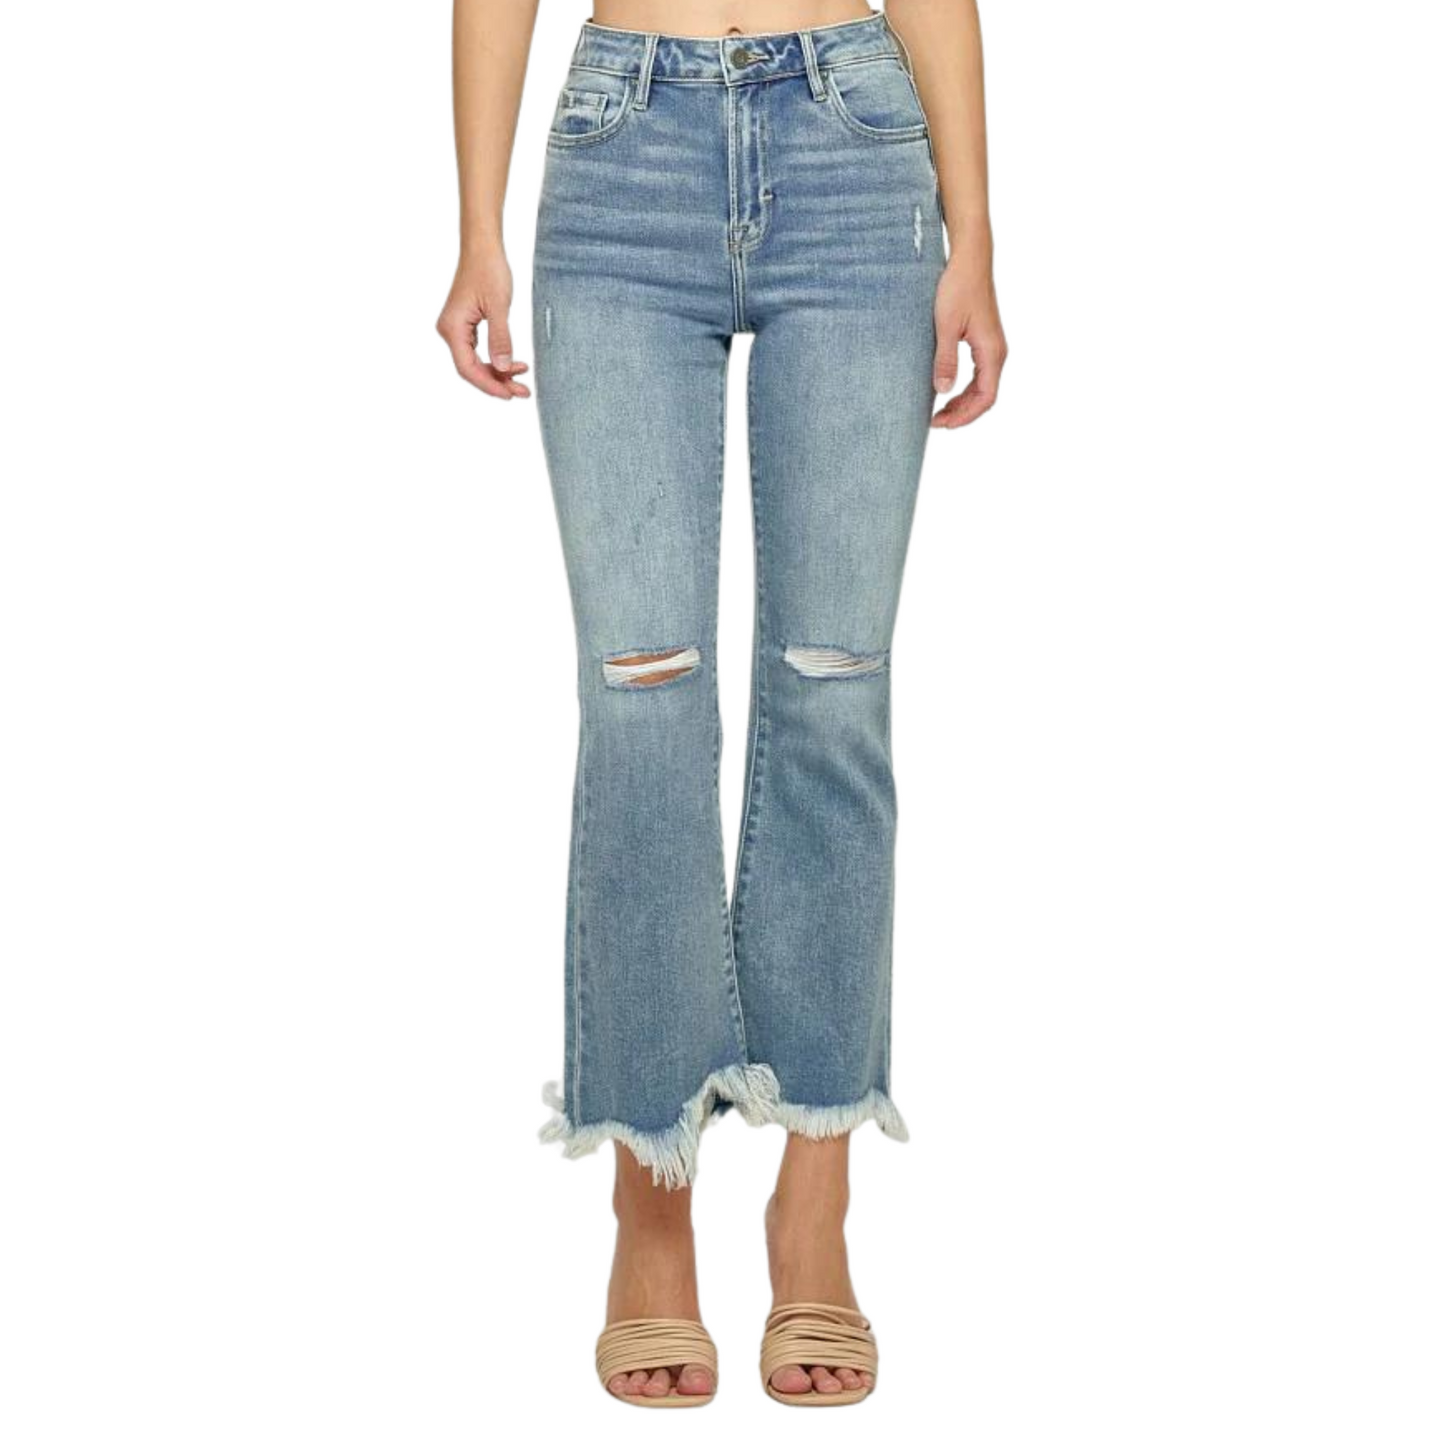 Happy High Waist Super Fray Flare Jeans are the perfect addition to any wardrobe. They feature light wash distressed fabric with a cropped fit and frayed hems, creating an edgy yet polished look. Take your style to the next level with these fashionable jeans.